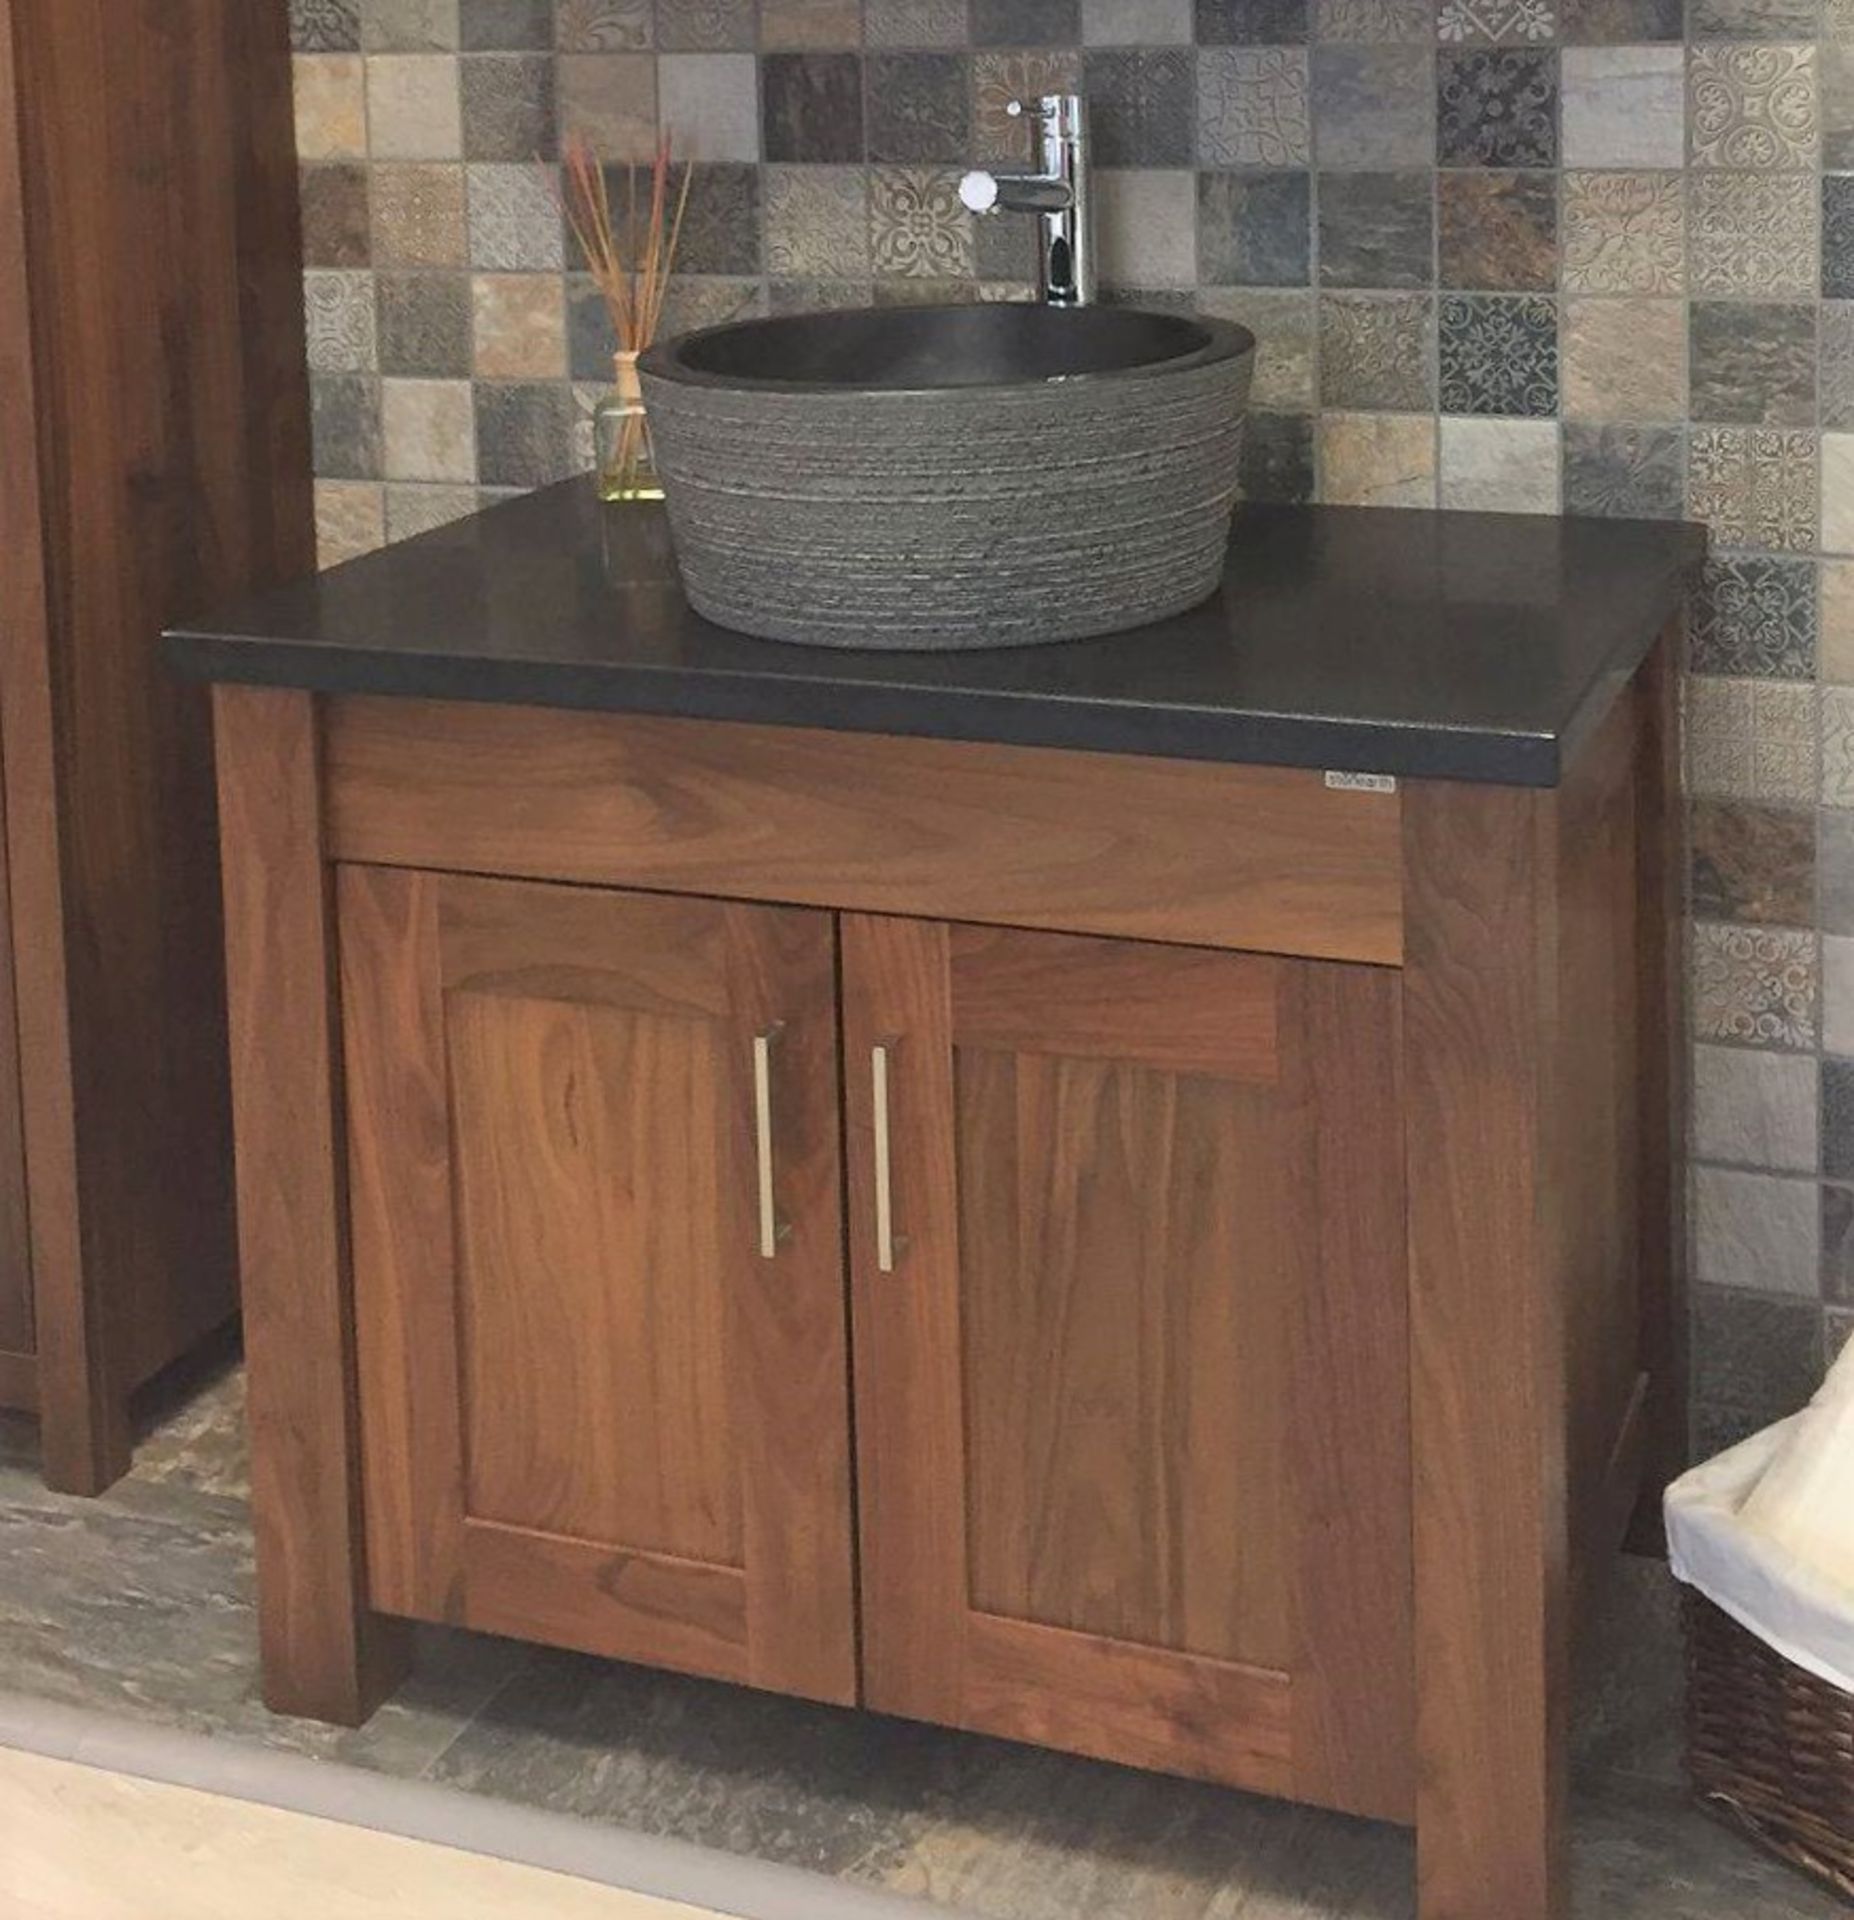 1 x Stonearth 'Finesse' Countertop Washstand - American Solid Walnut - Flat Pack - RRP £1,400 - Image 4 of 10